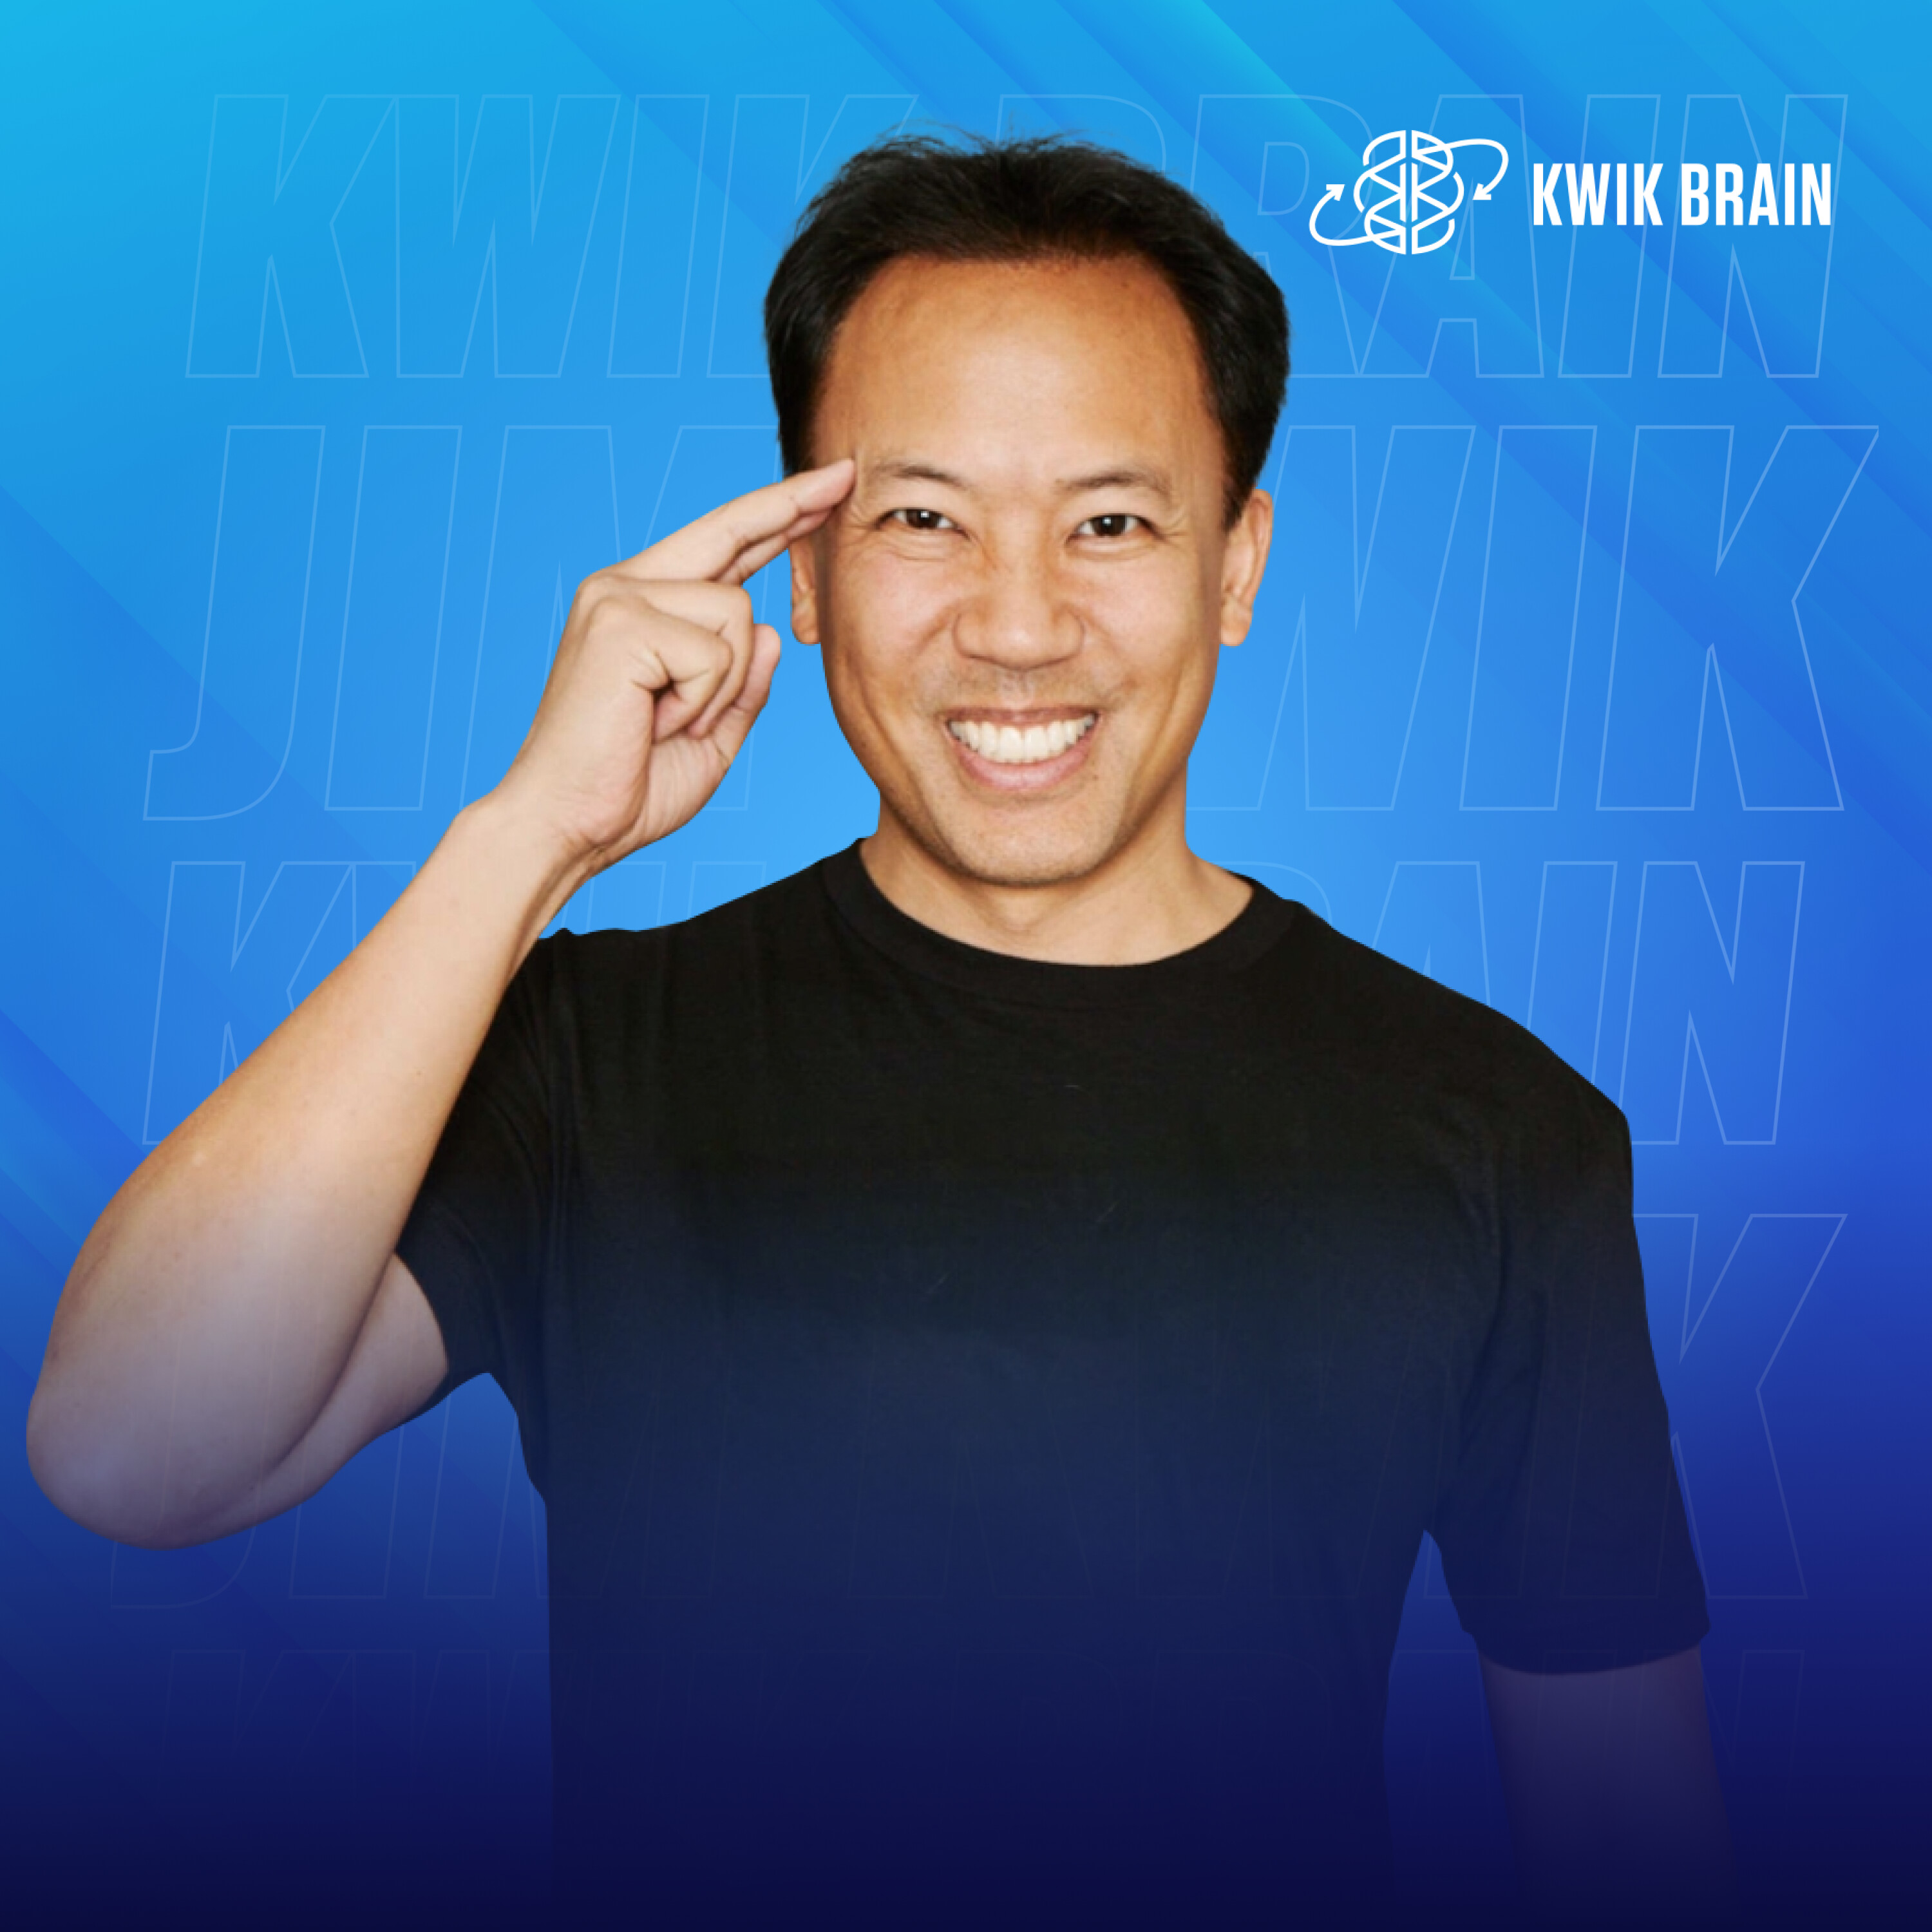 Applying the Limitless Steps with Jim Kwik